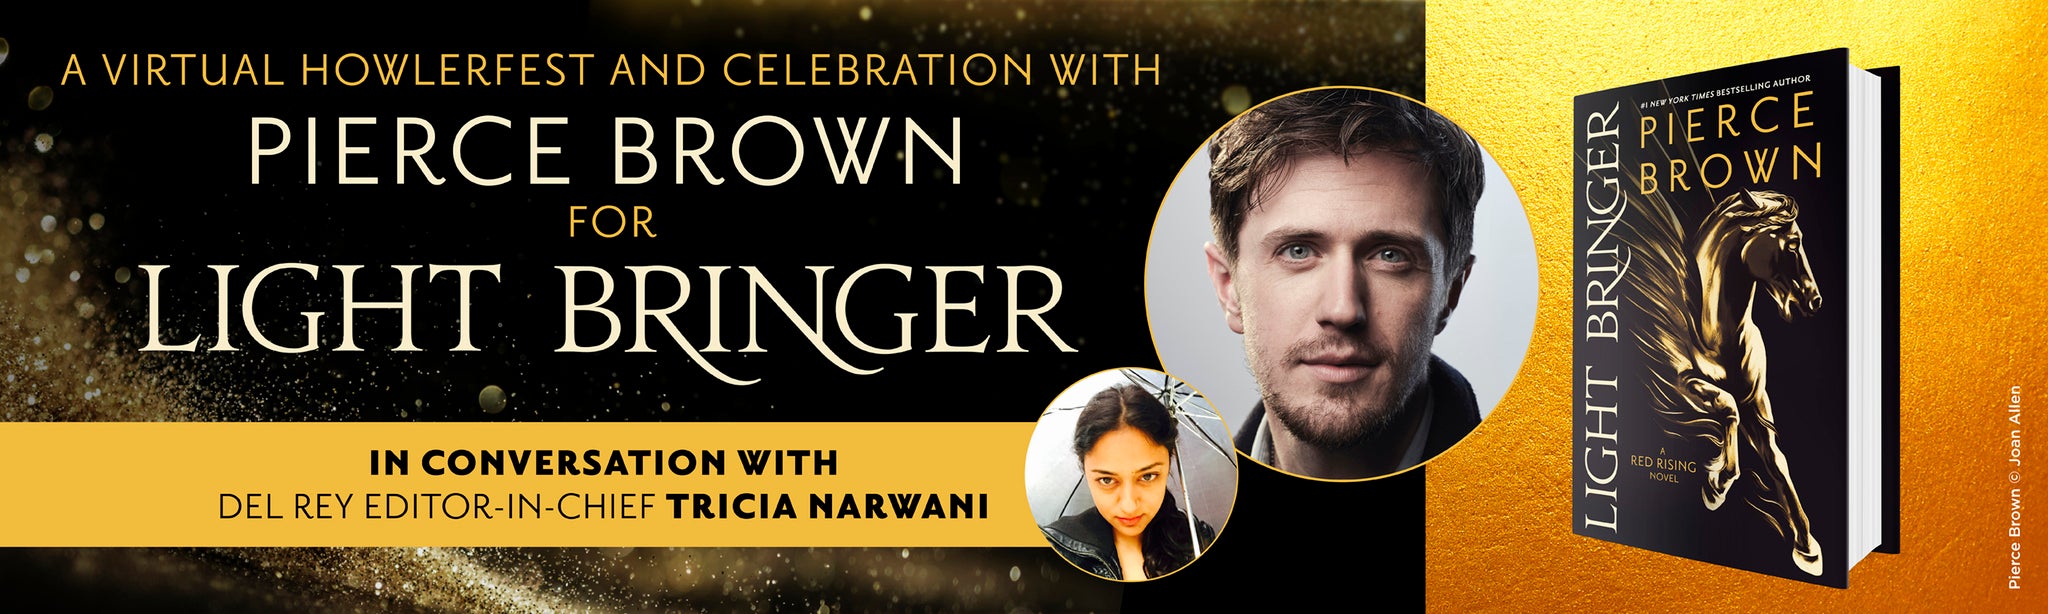 A Virtual Howlerfest and Celebration with Pierce Brown for LIGHT BRINGER